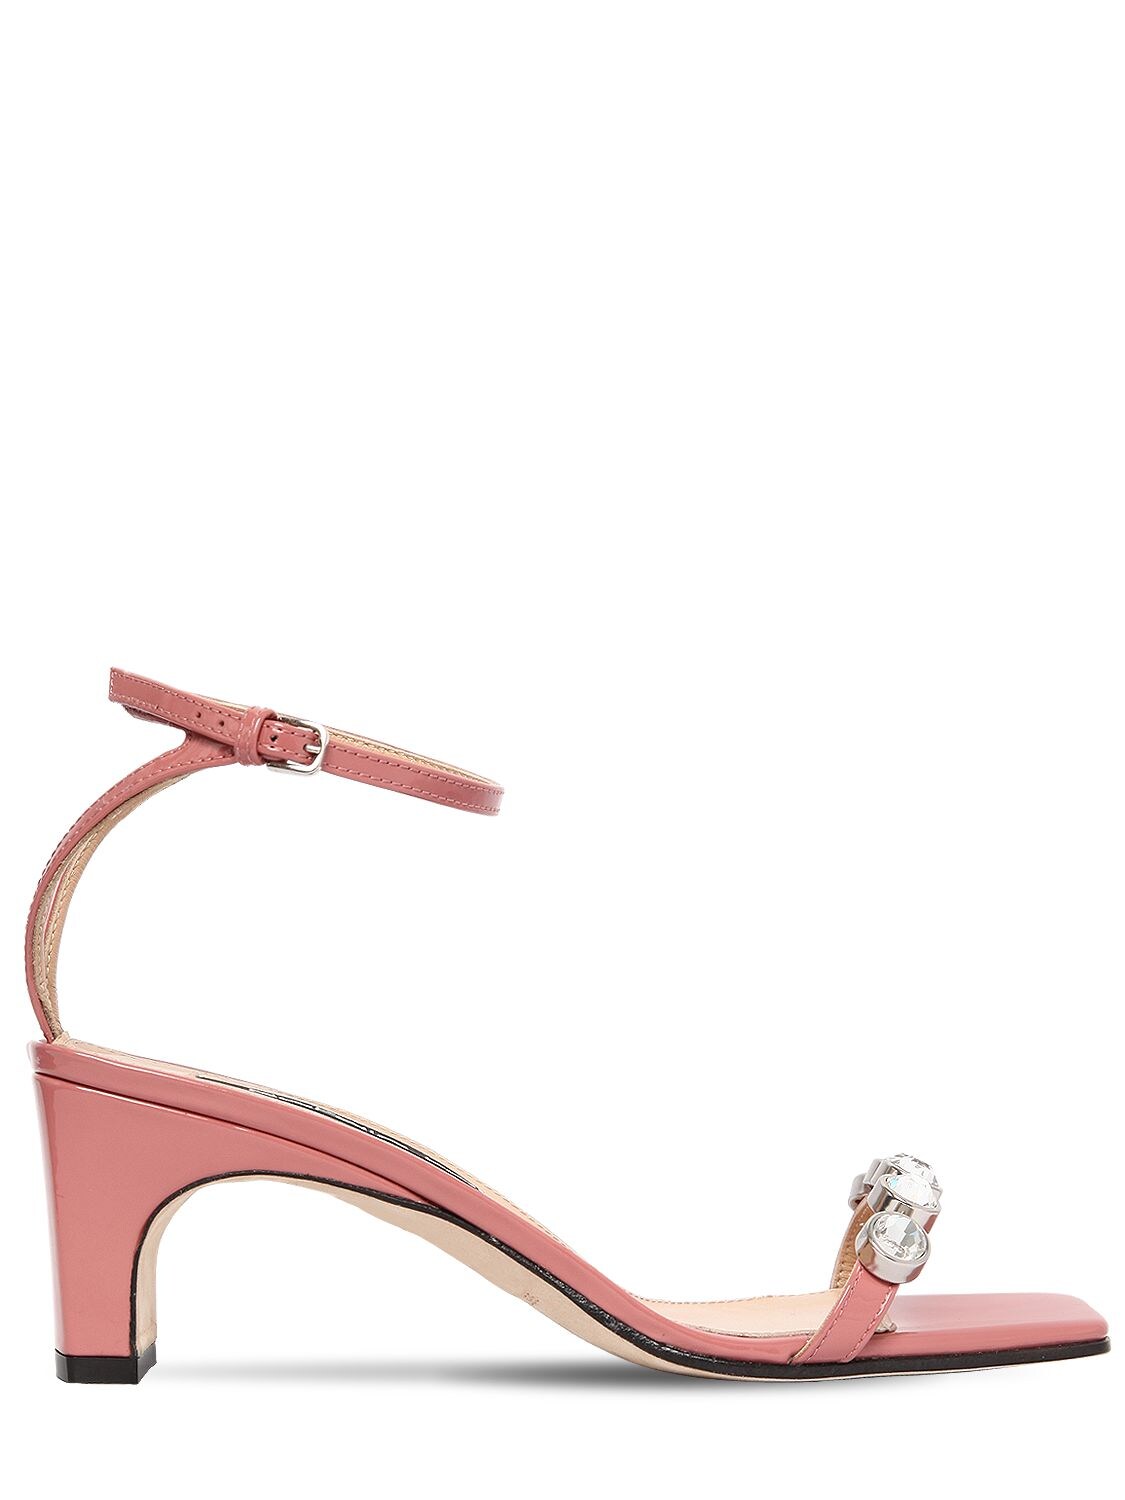 Sergio Rossi 60mm Embellished Patent Leather Sandals In Blush